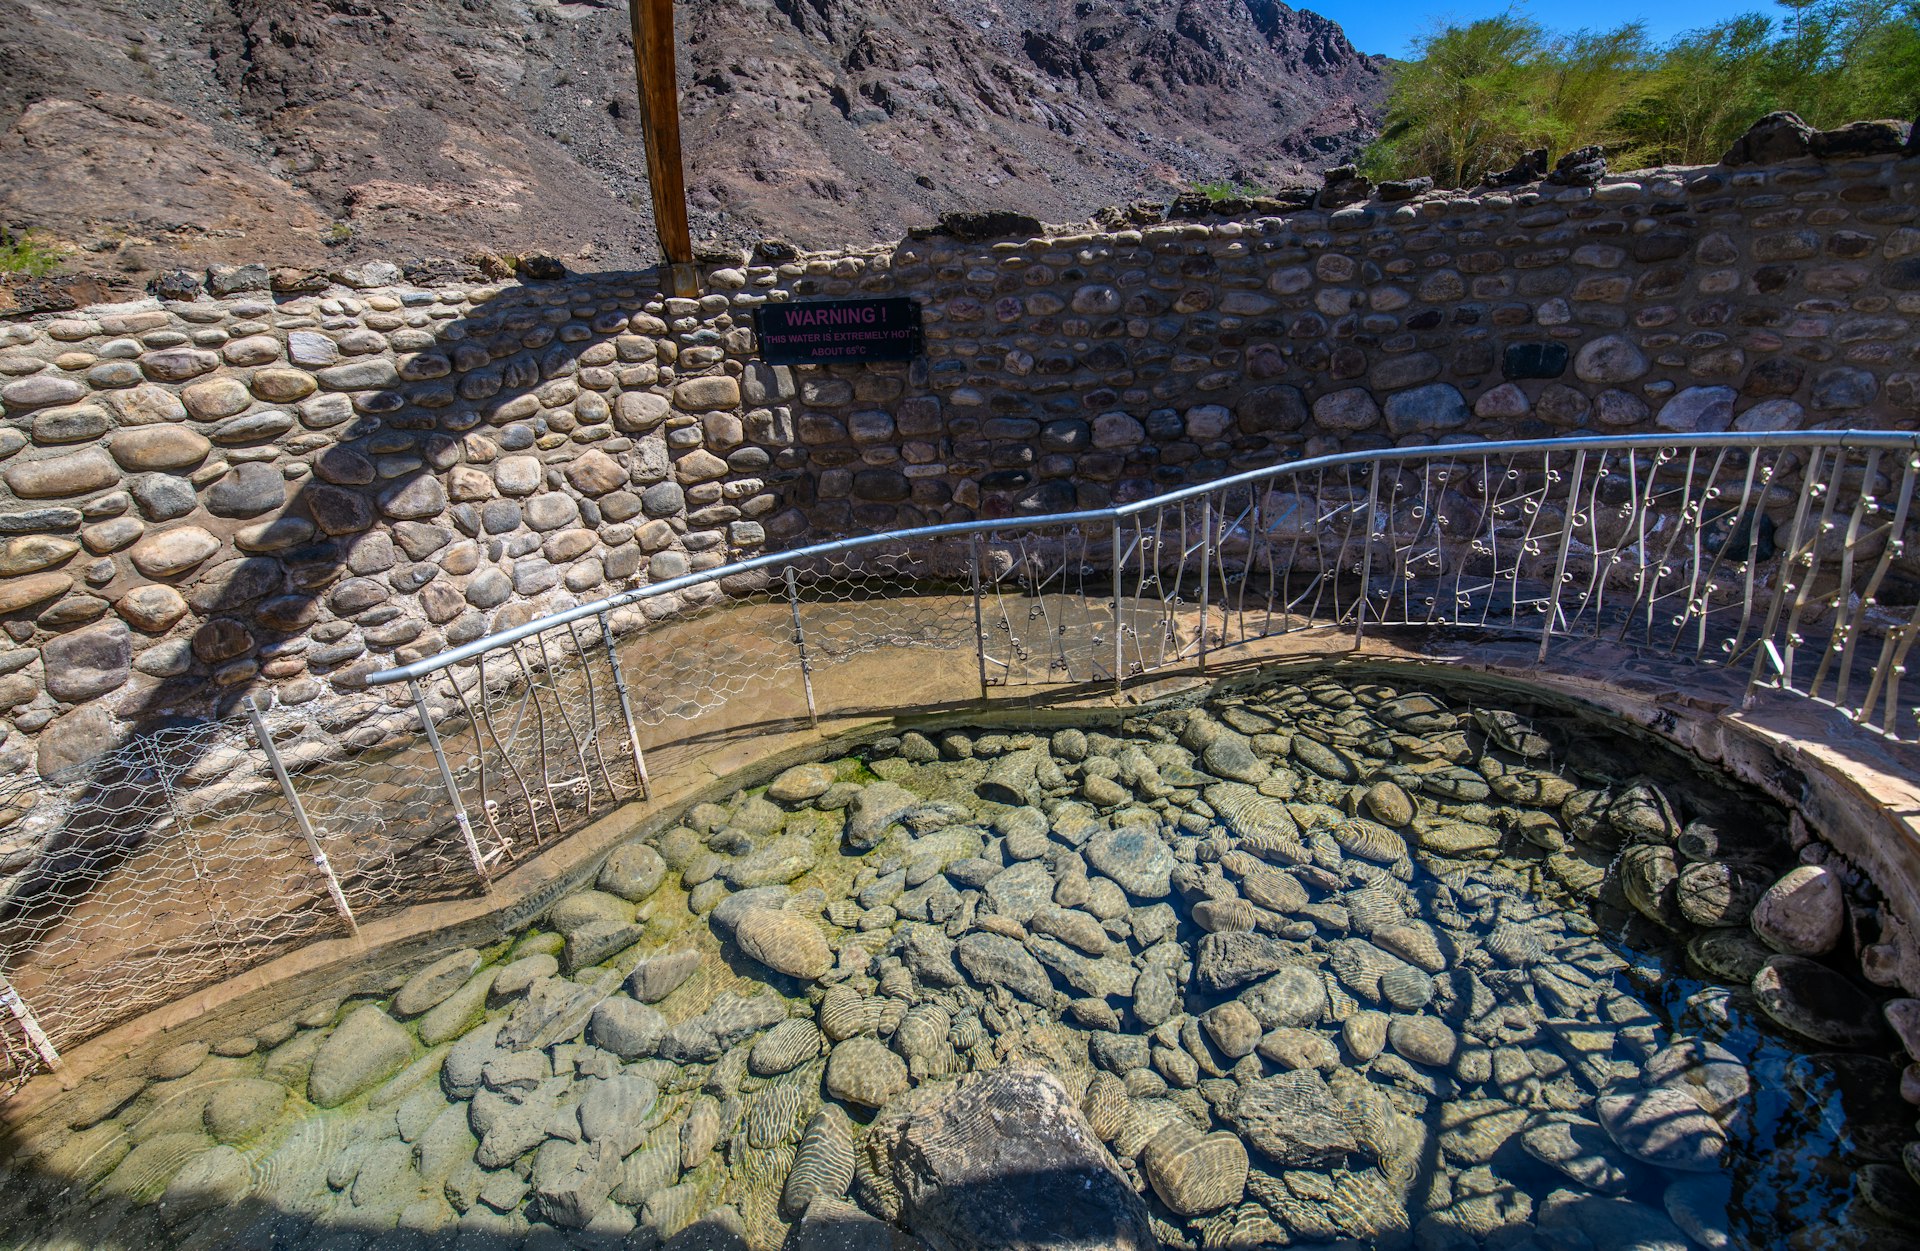 A paved path leads to a hot spring in |Ai-|Ais/Richtersveld Transfrontier Park, Namibia, Africa